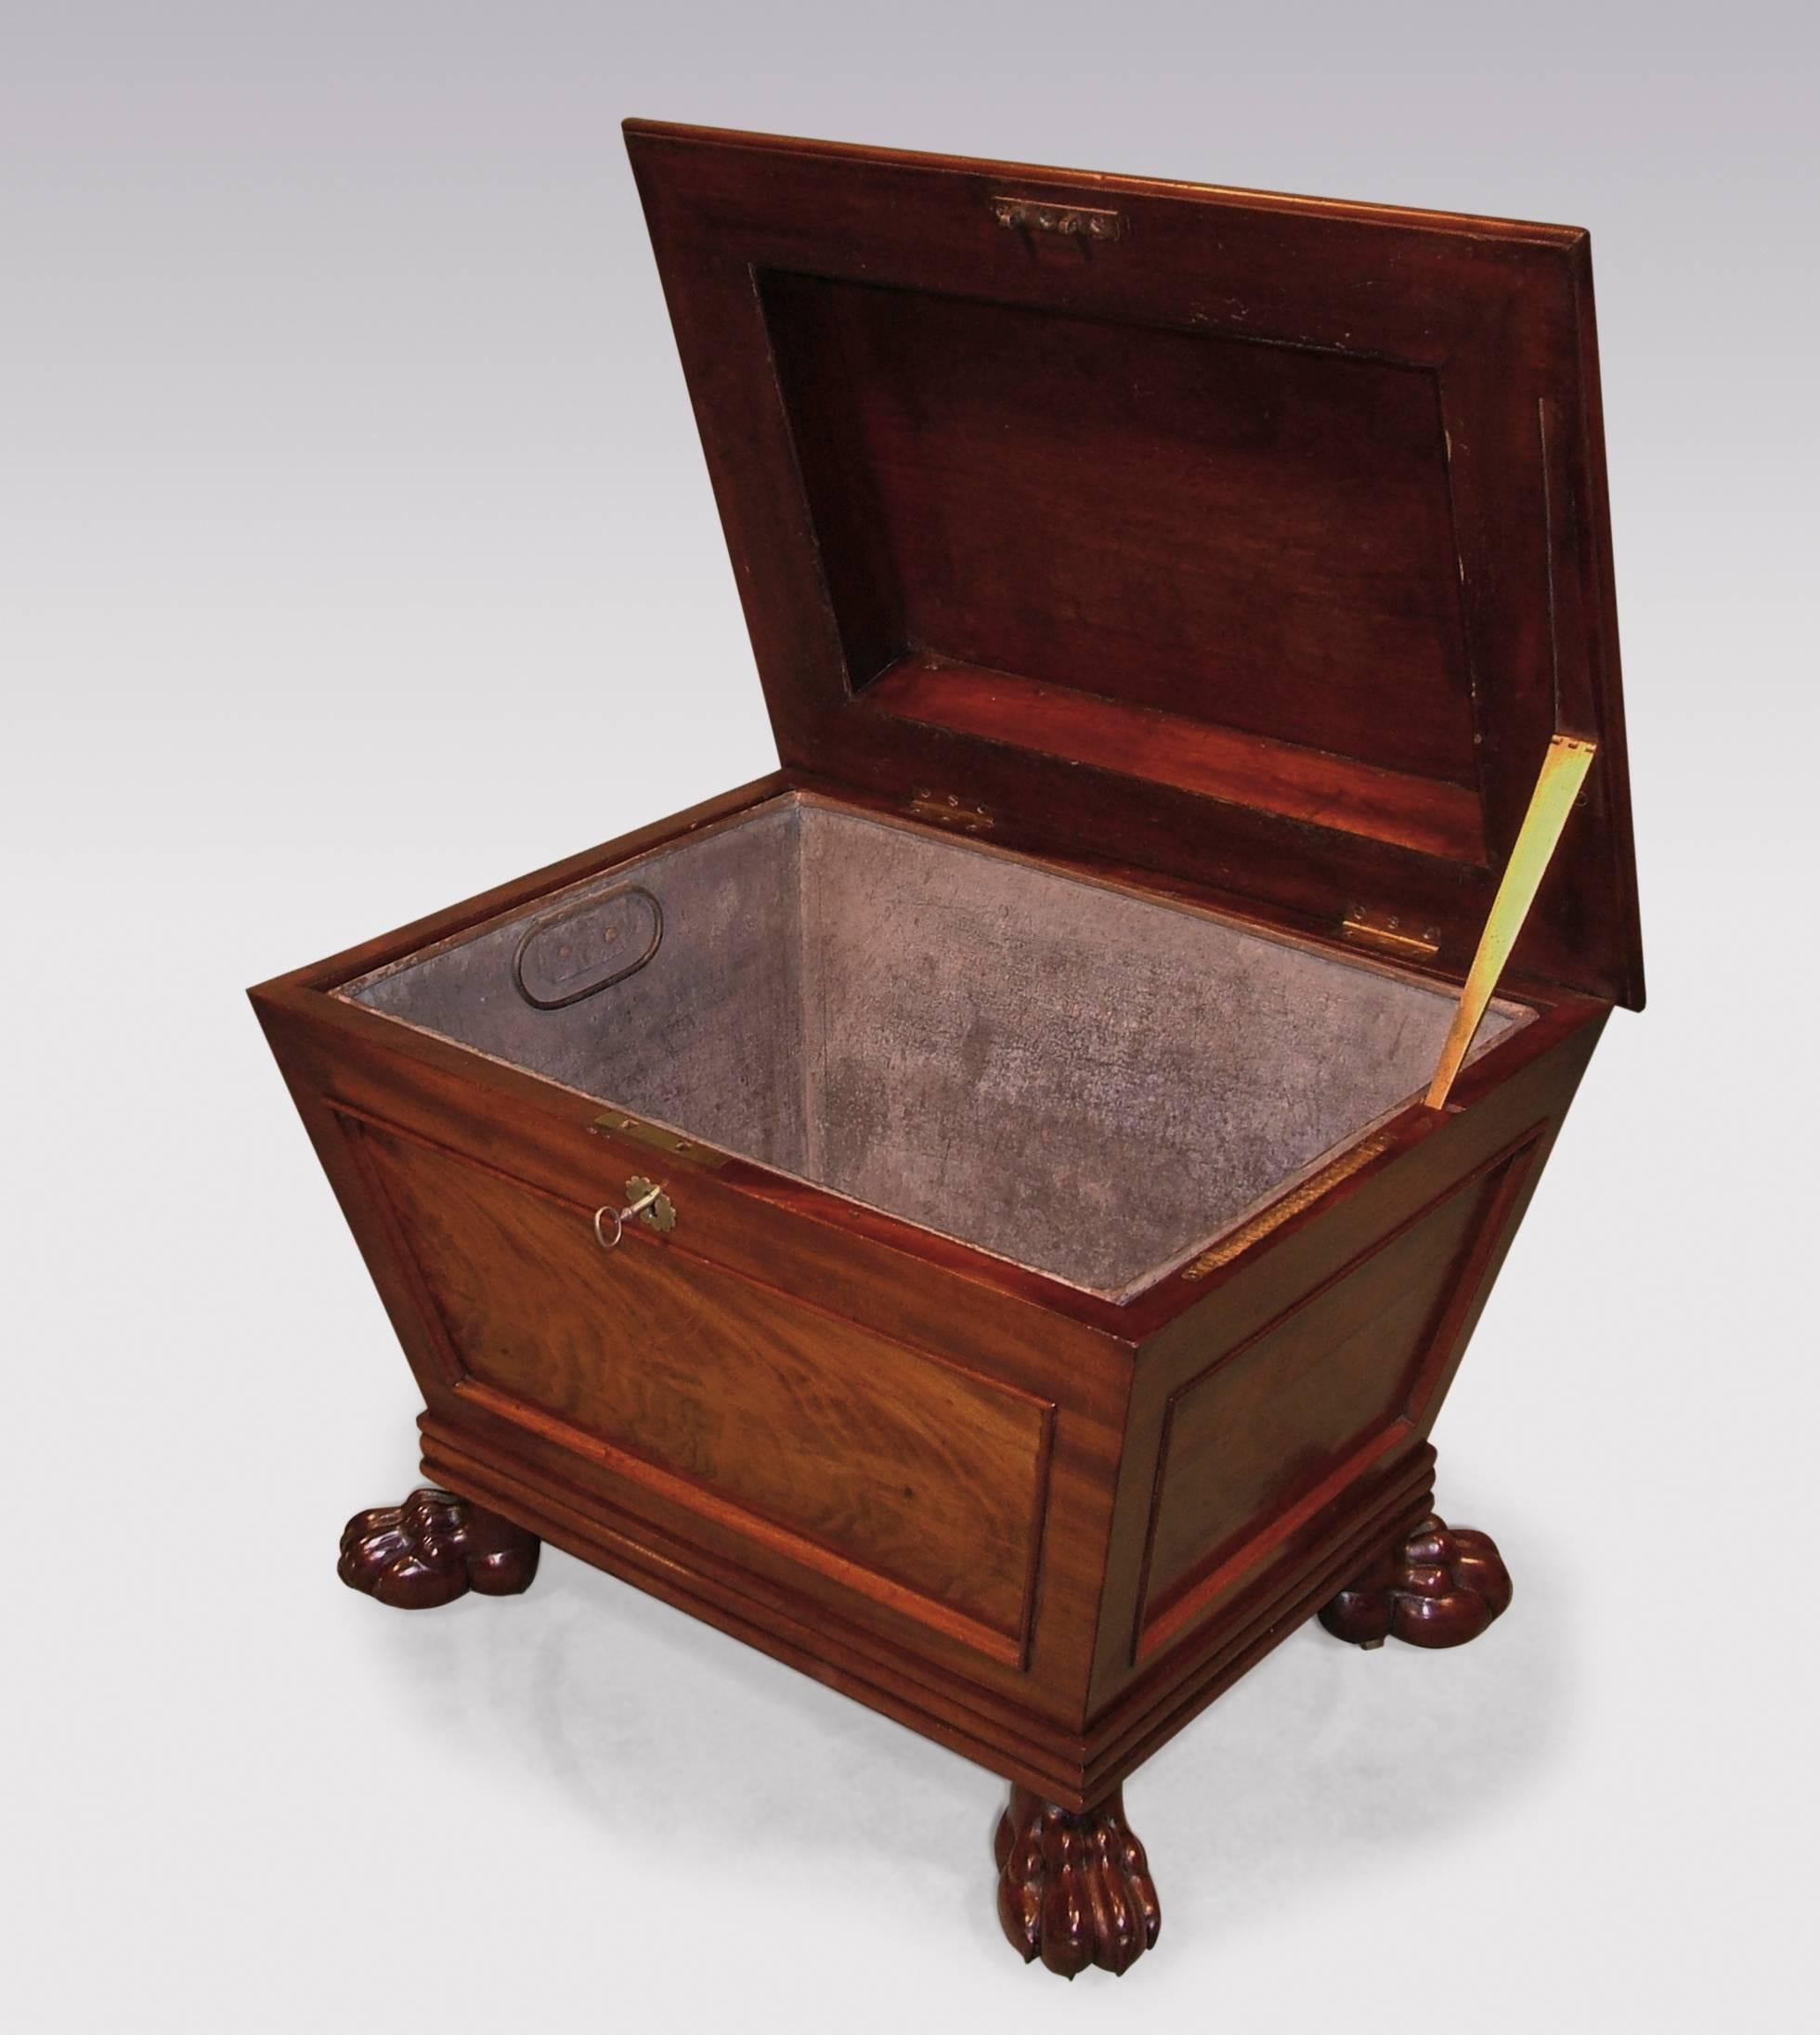 An early 19th century Regency period flame figured mahogany sarcophagus-shaped Cellarette, of attractive small proportions, having moulded edge lid enclosing replacement liner, supported on carved lions paw feet with concealed castors.